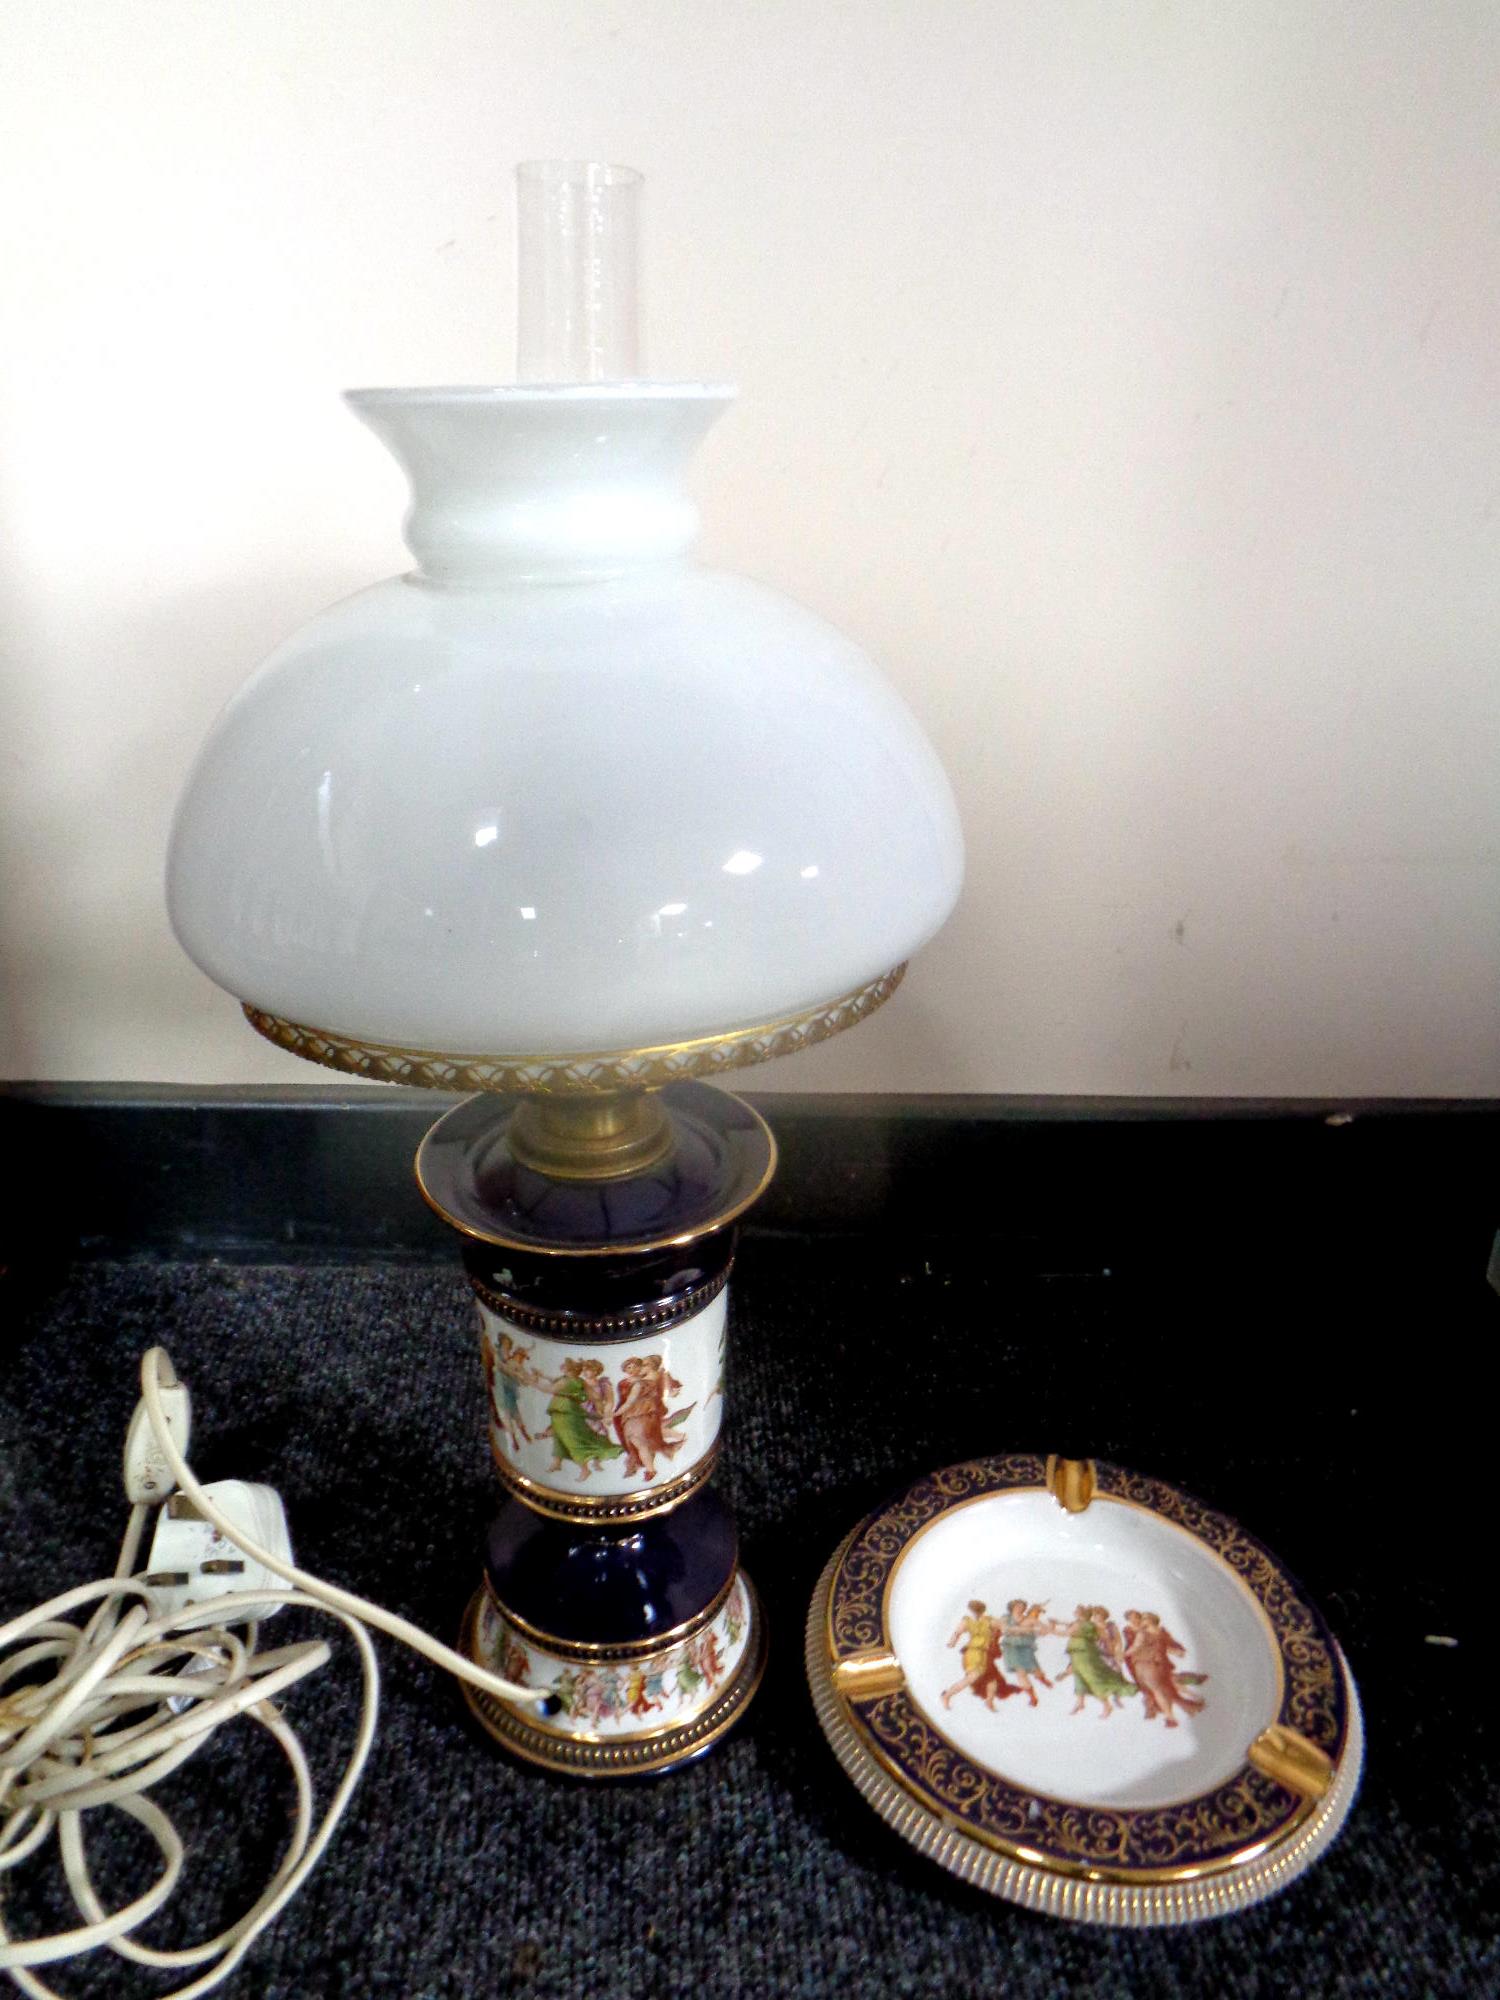 An Italian ceramic lamp with glass shade and matching ashtray